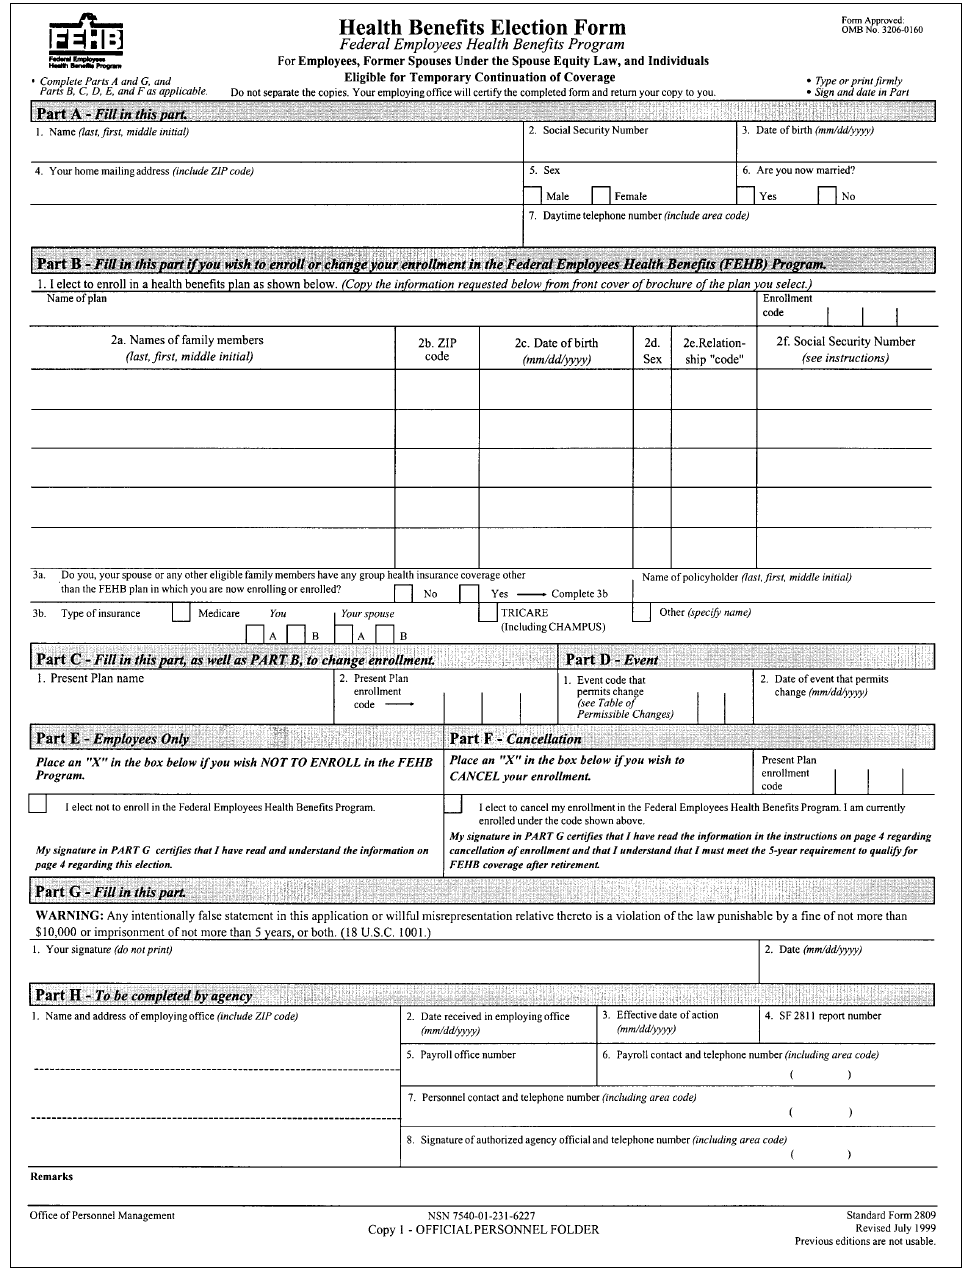 Form SF-2809, Health Benefits Election Form